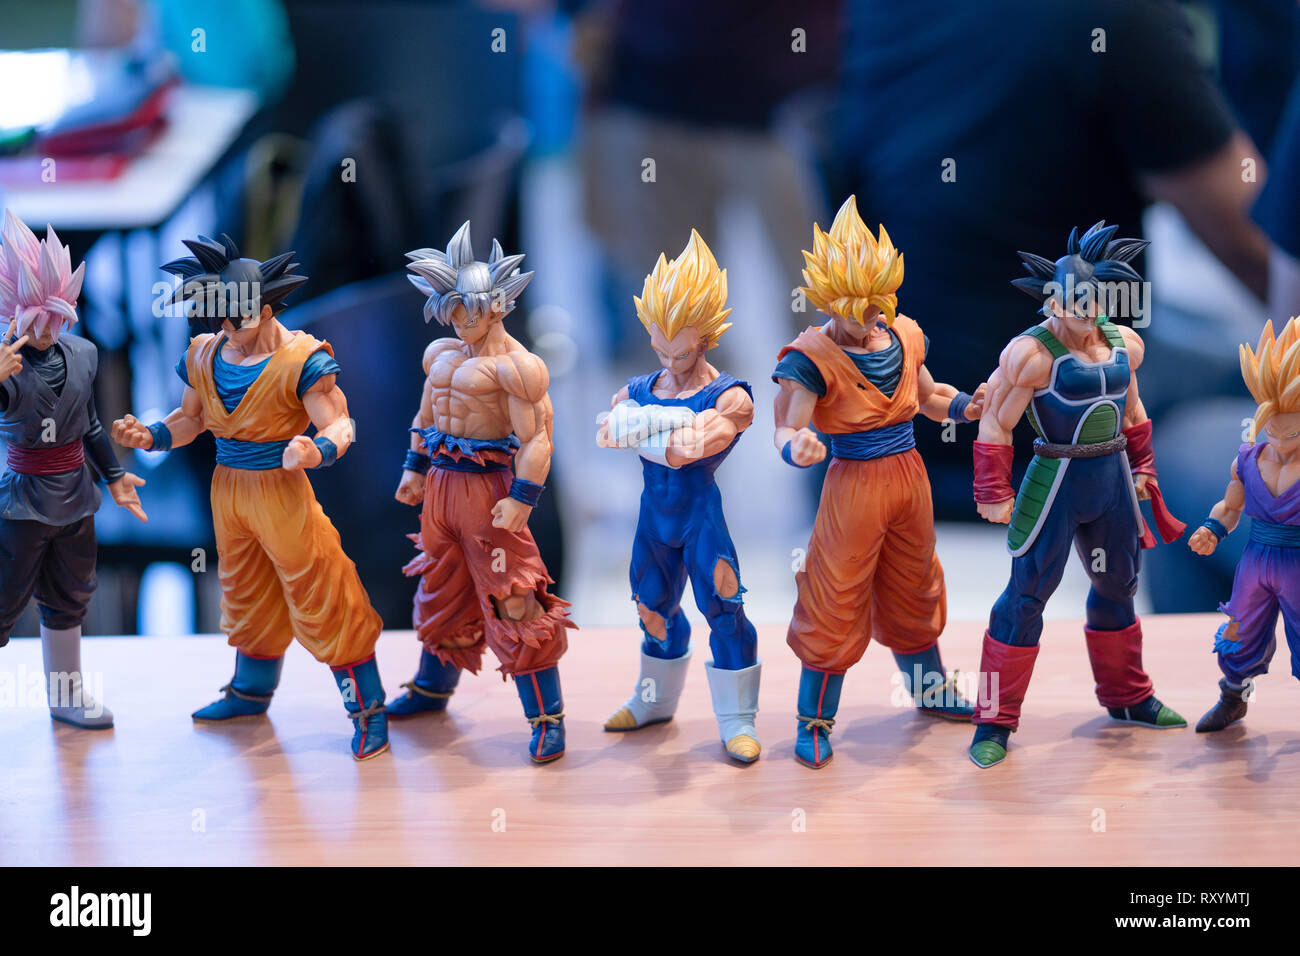 Dragon Ball Z Japanese animation charcter figures on display at Cosplay event,Cebu City,Philippines Stock Photo